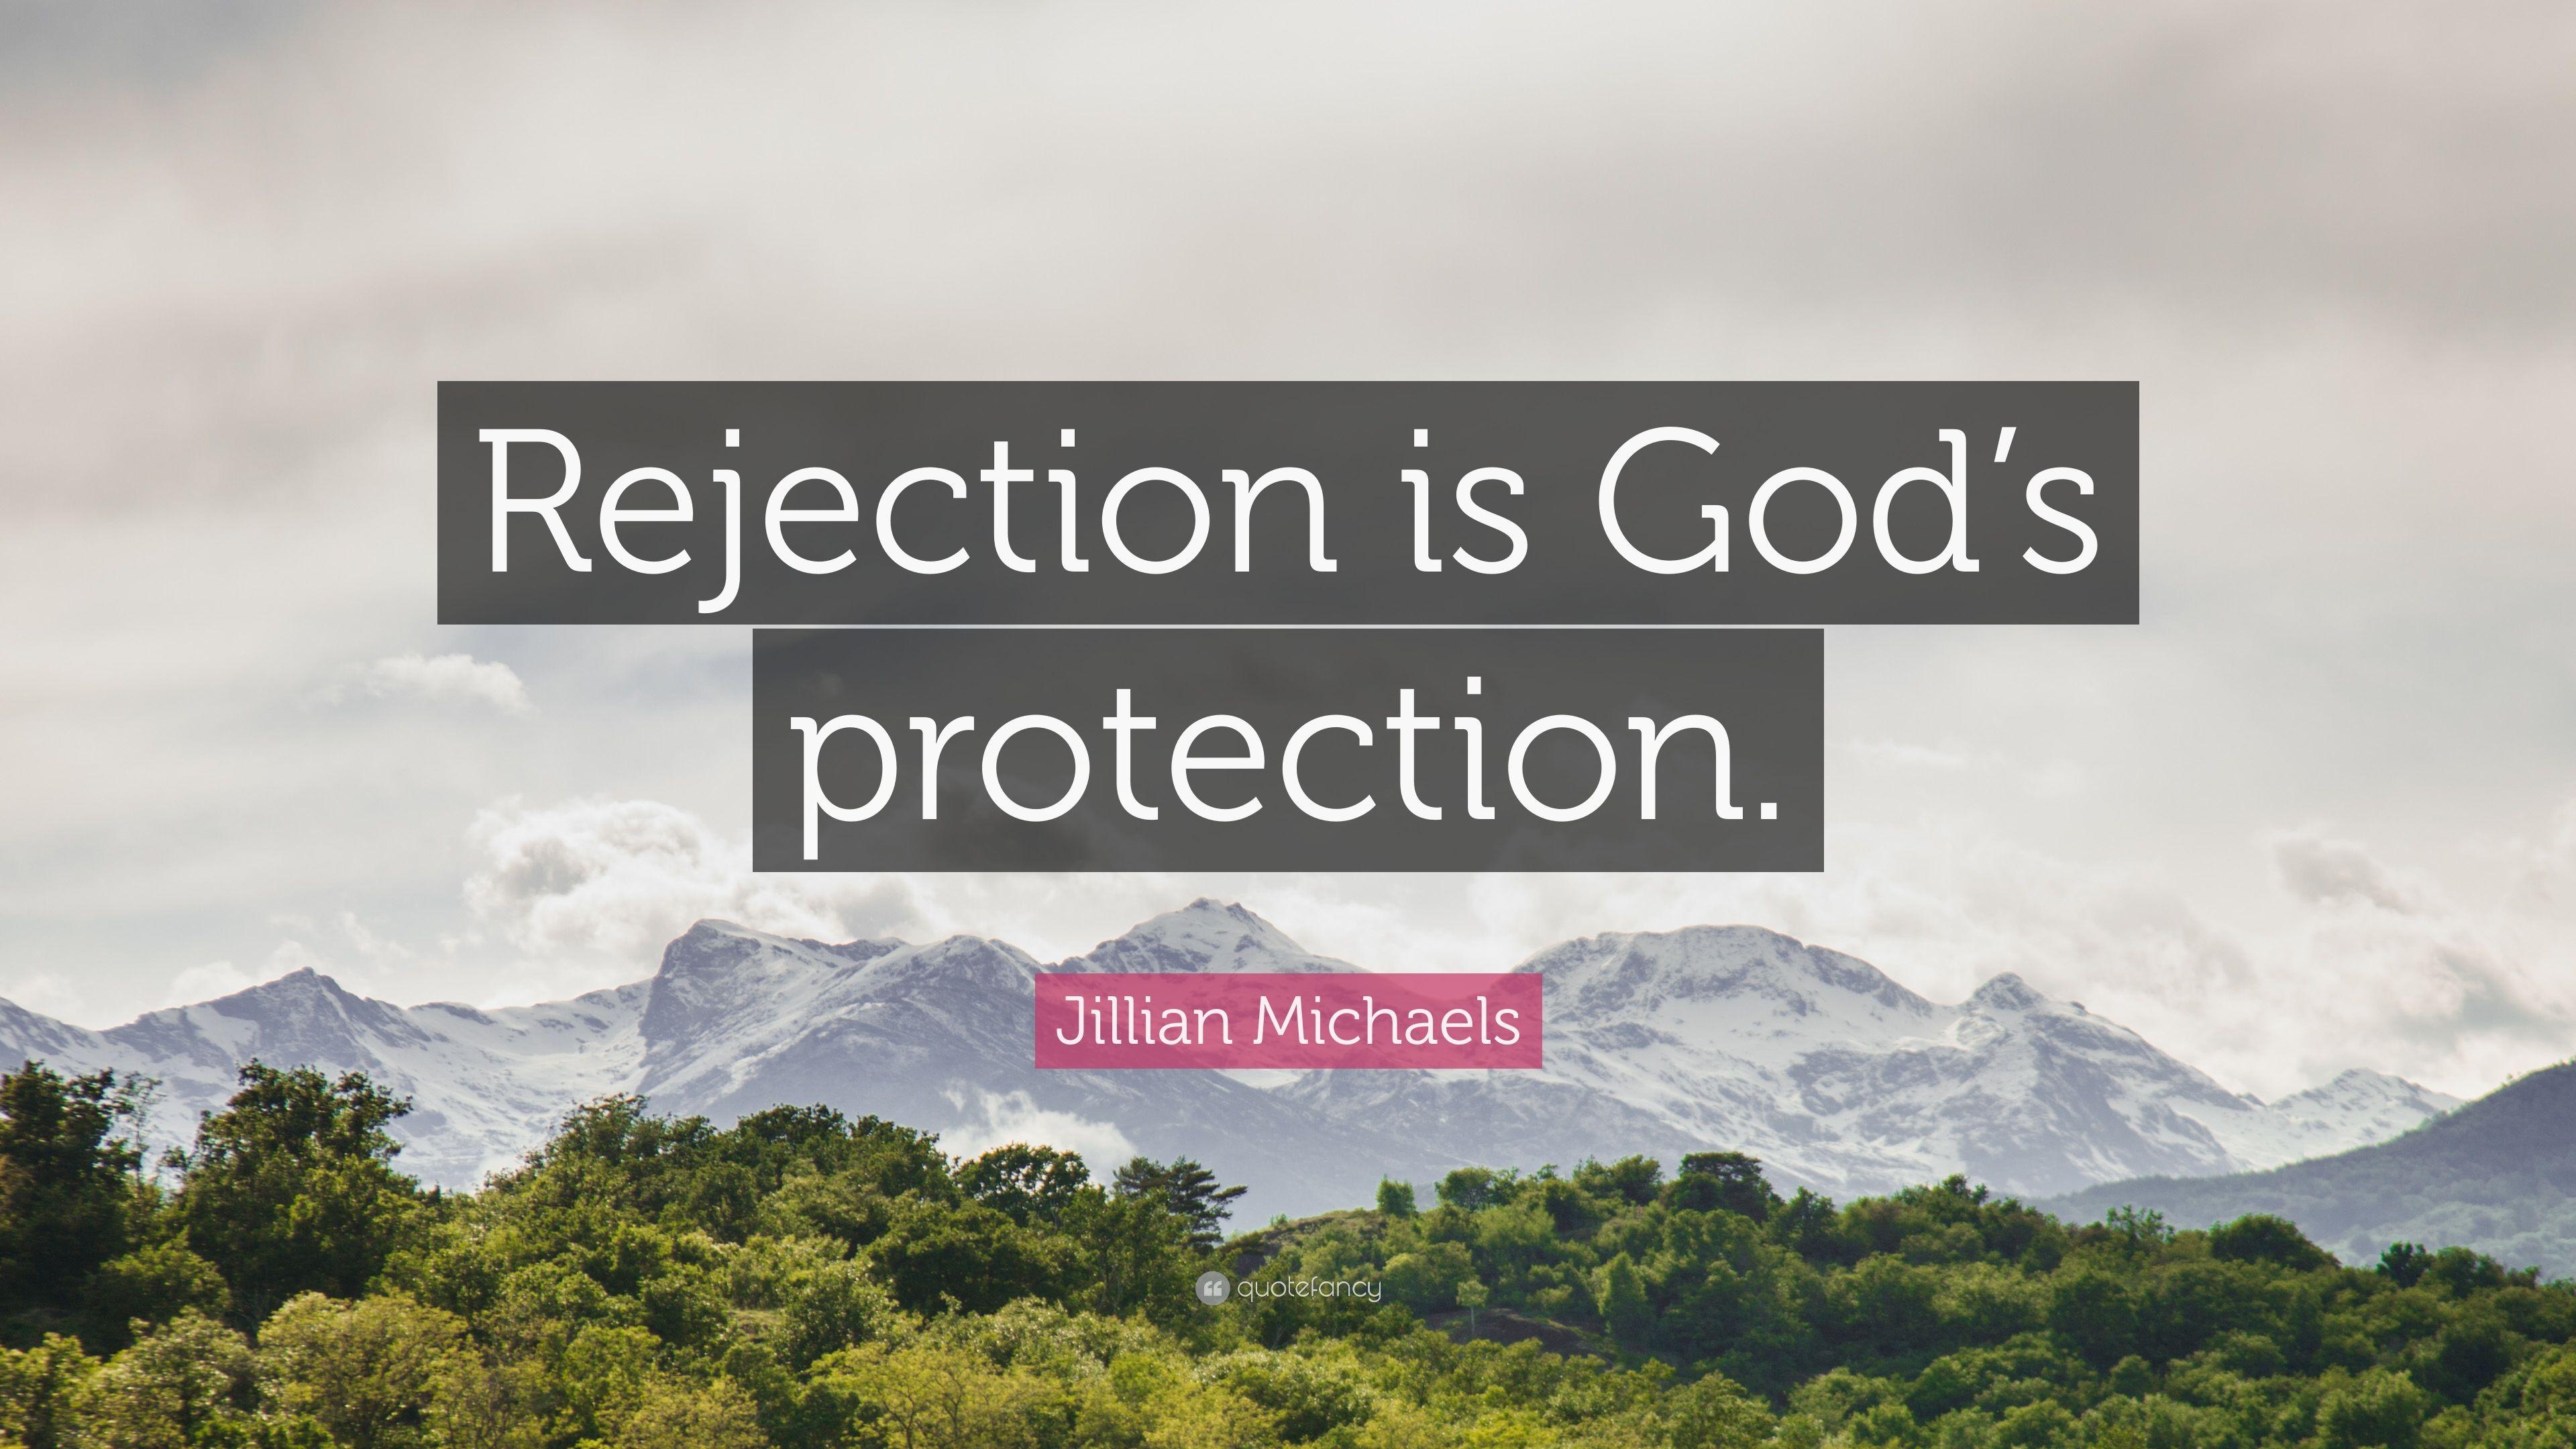 Jillian Michaels Quote: “Rejection is God's protection.” 12